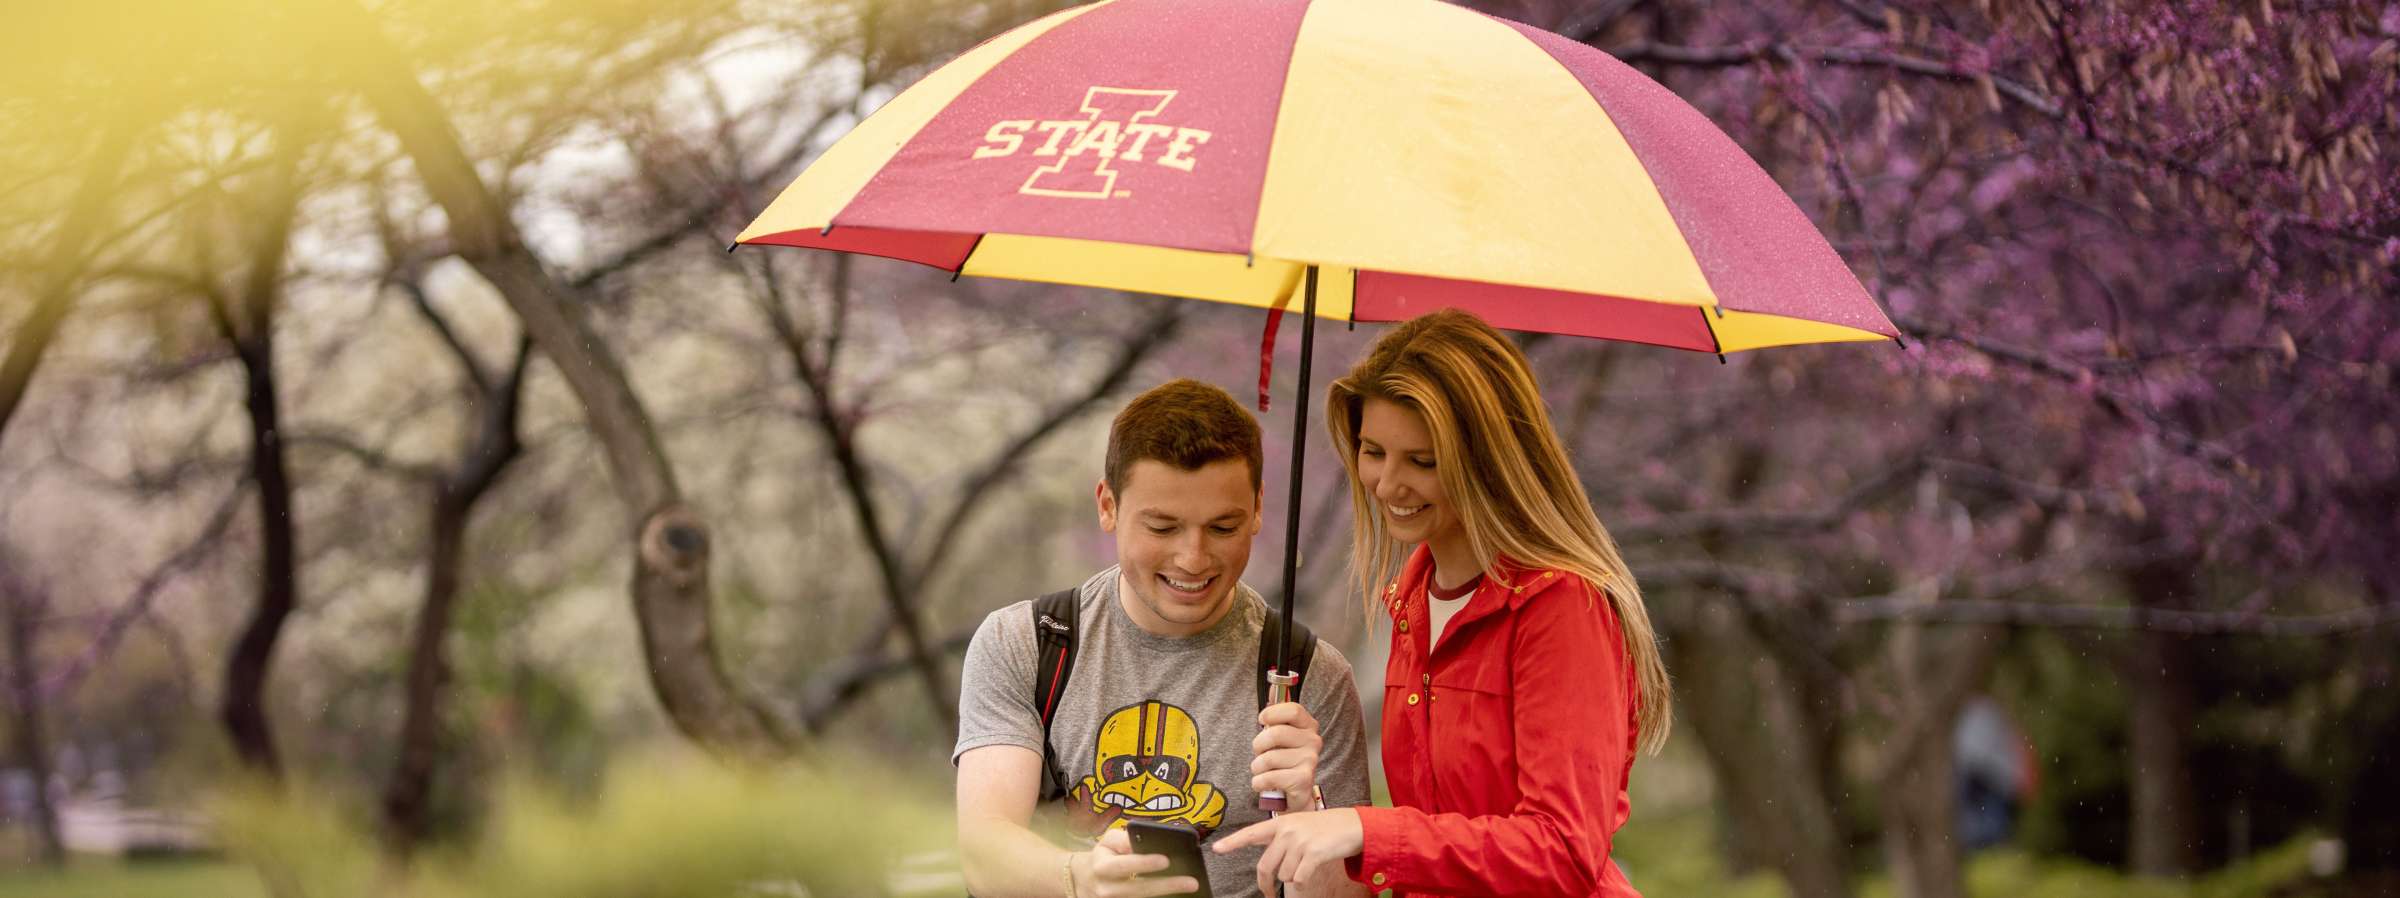 Two students standing under umbrella on campus